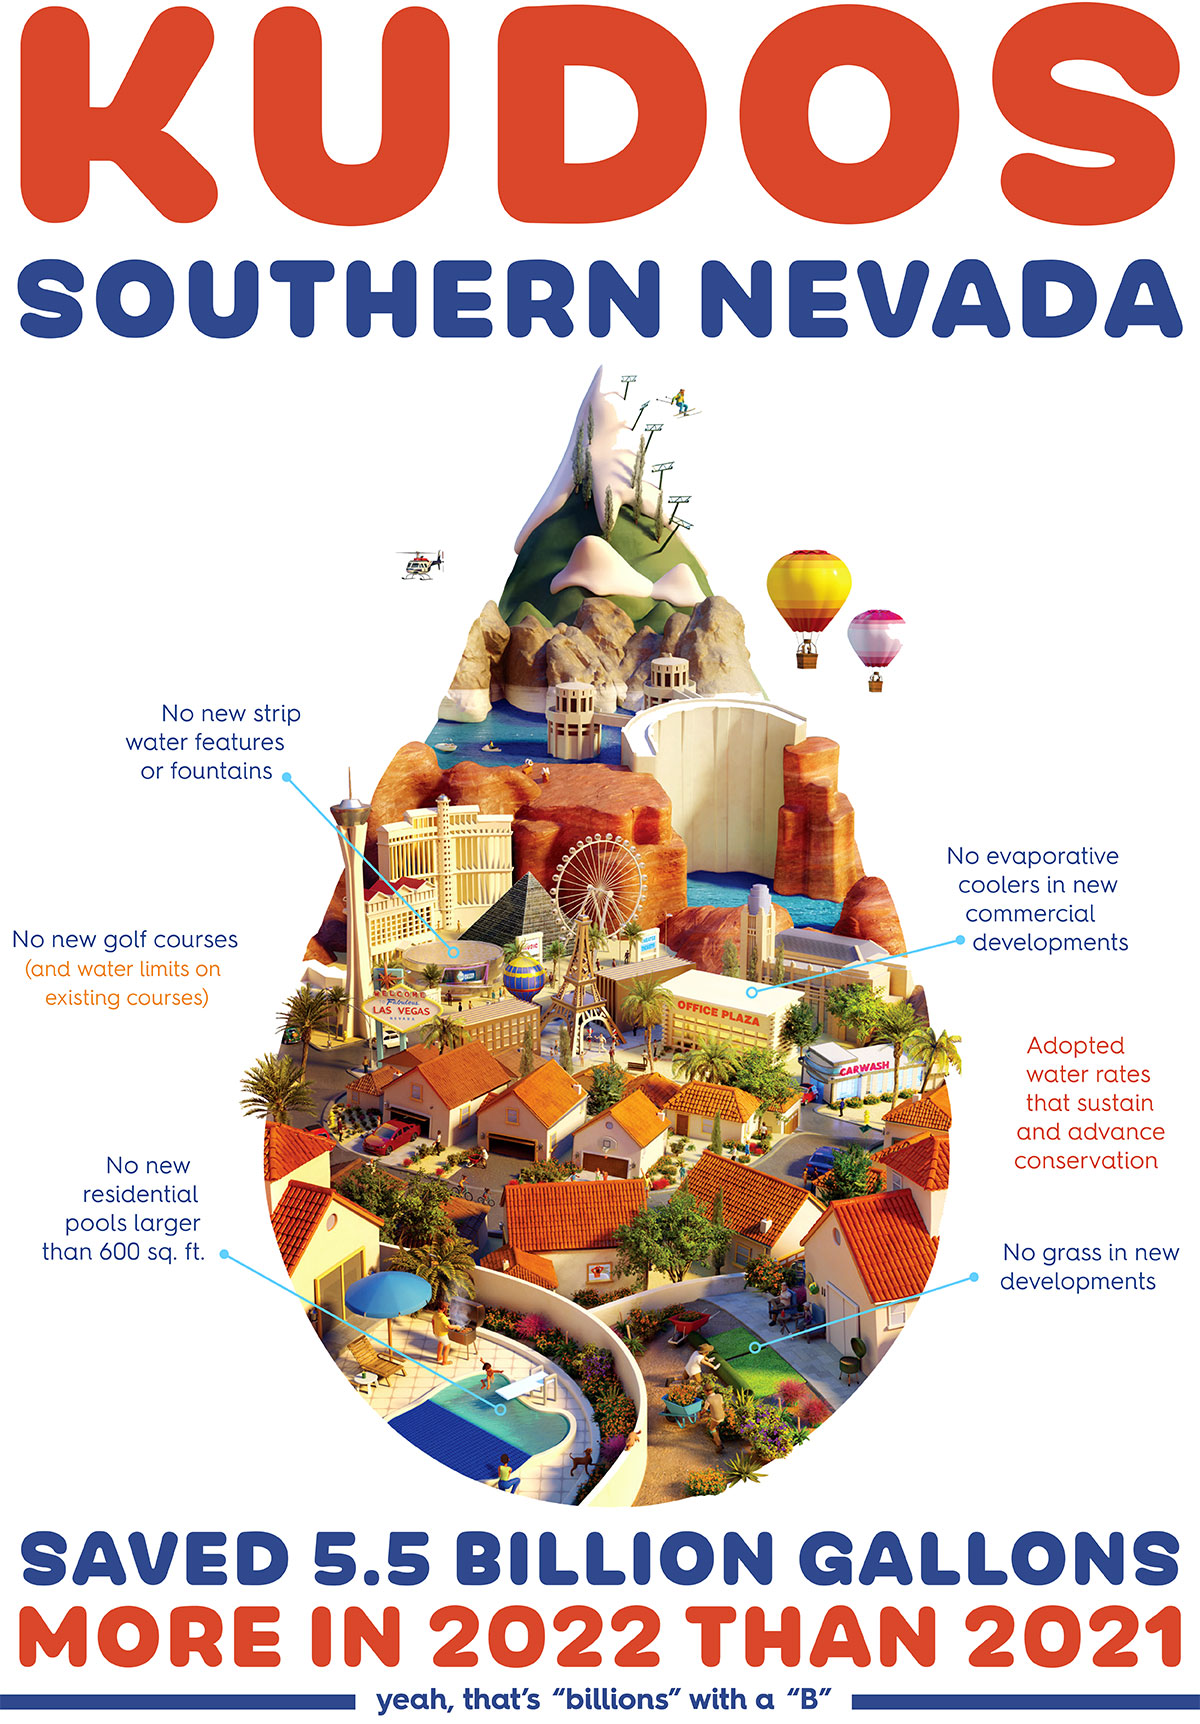 Graphic says 'kudos southern nevada - 5.5 billion gallons less water used than in 2021'